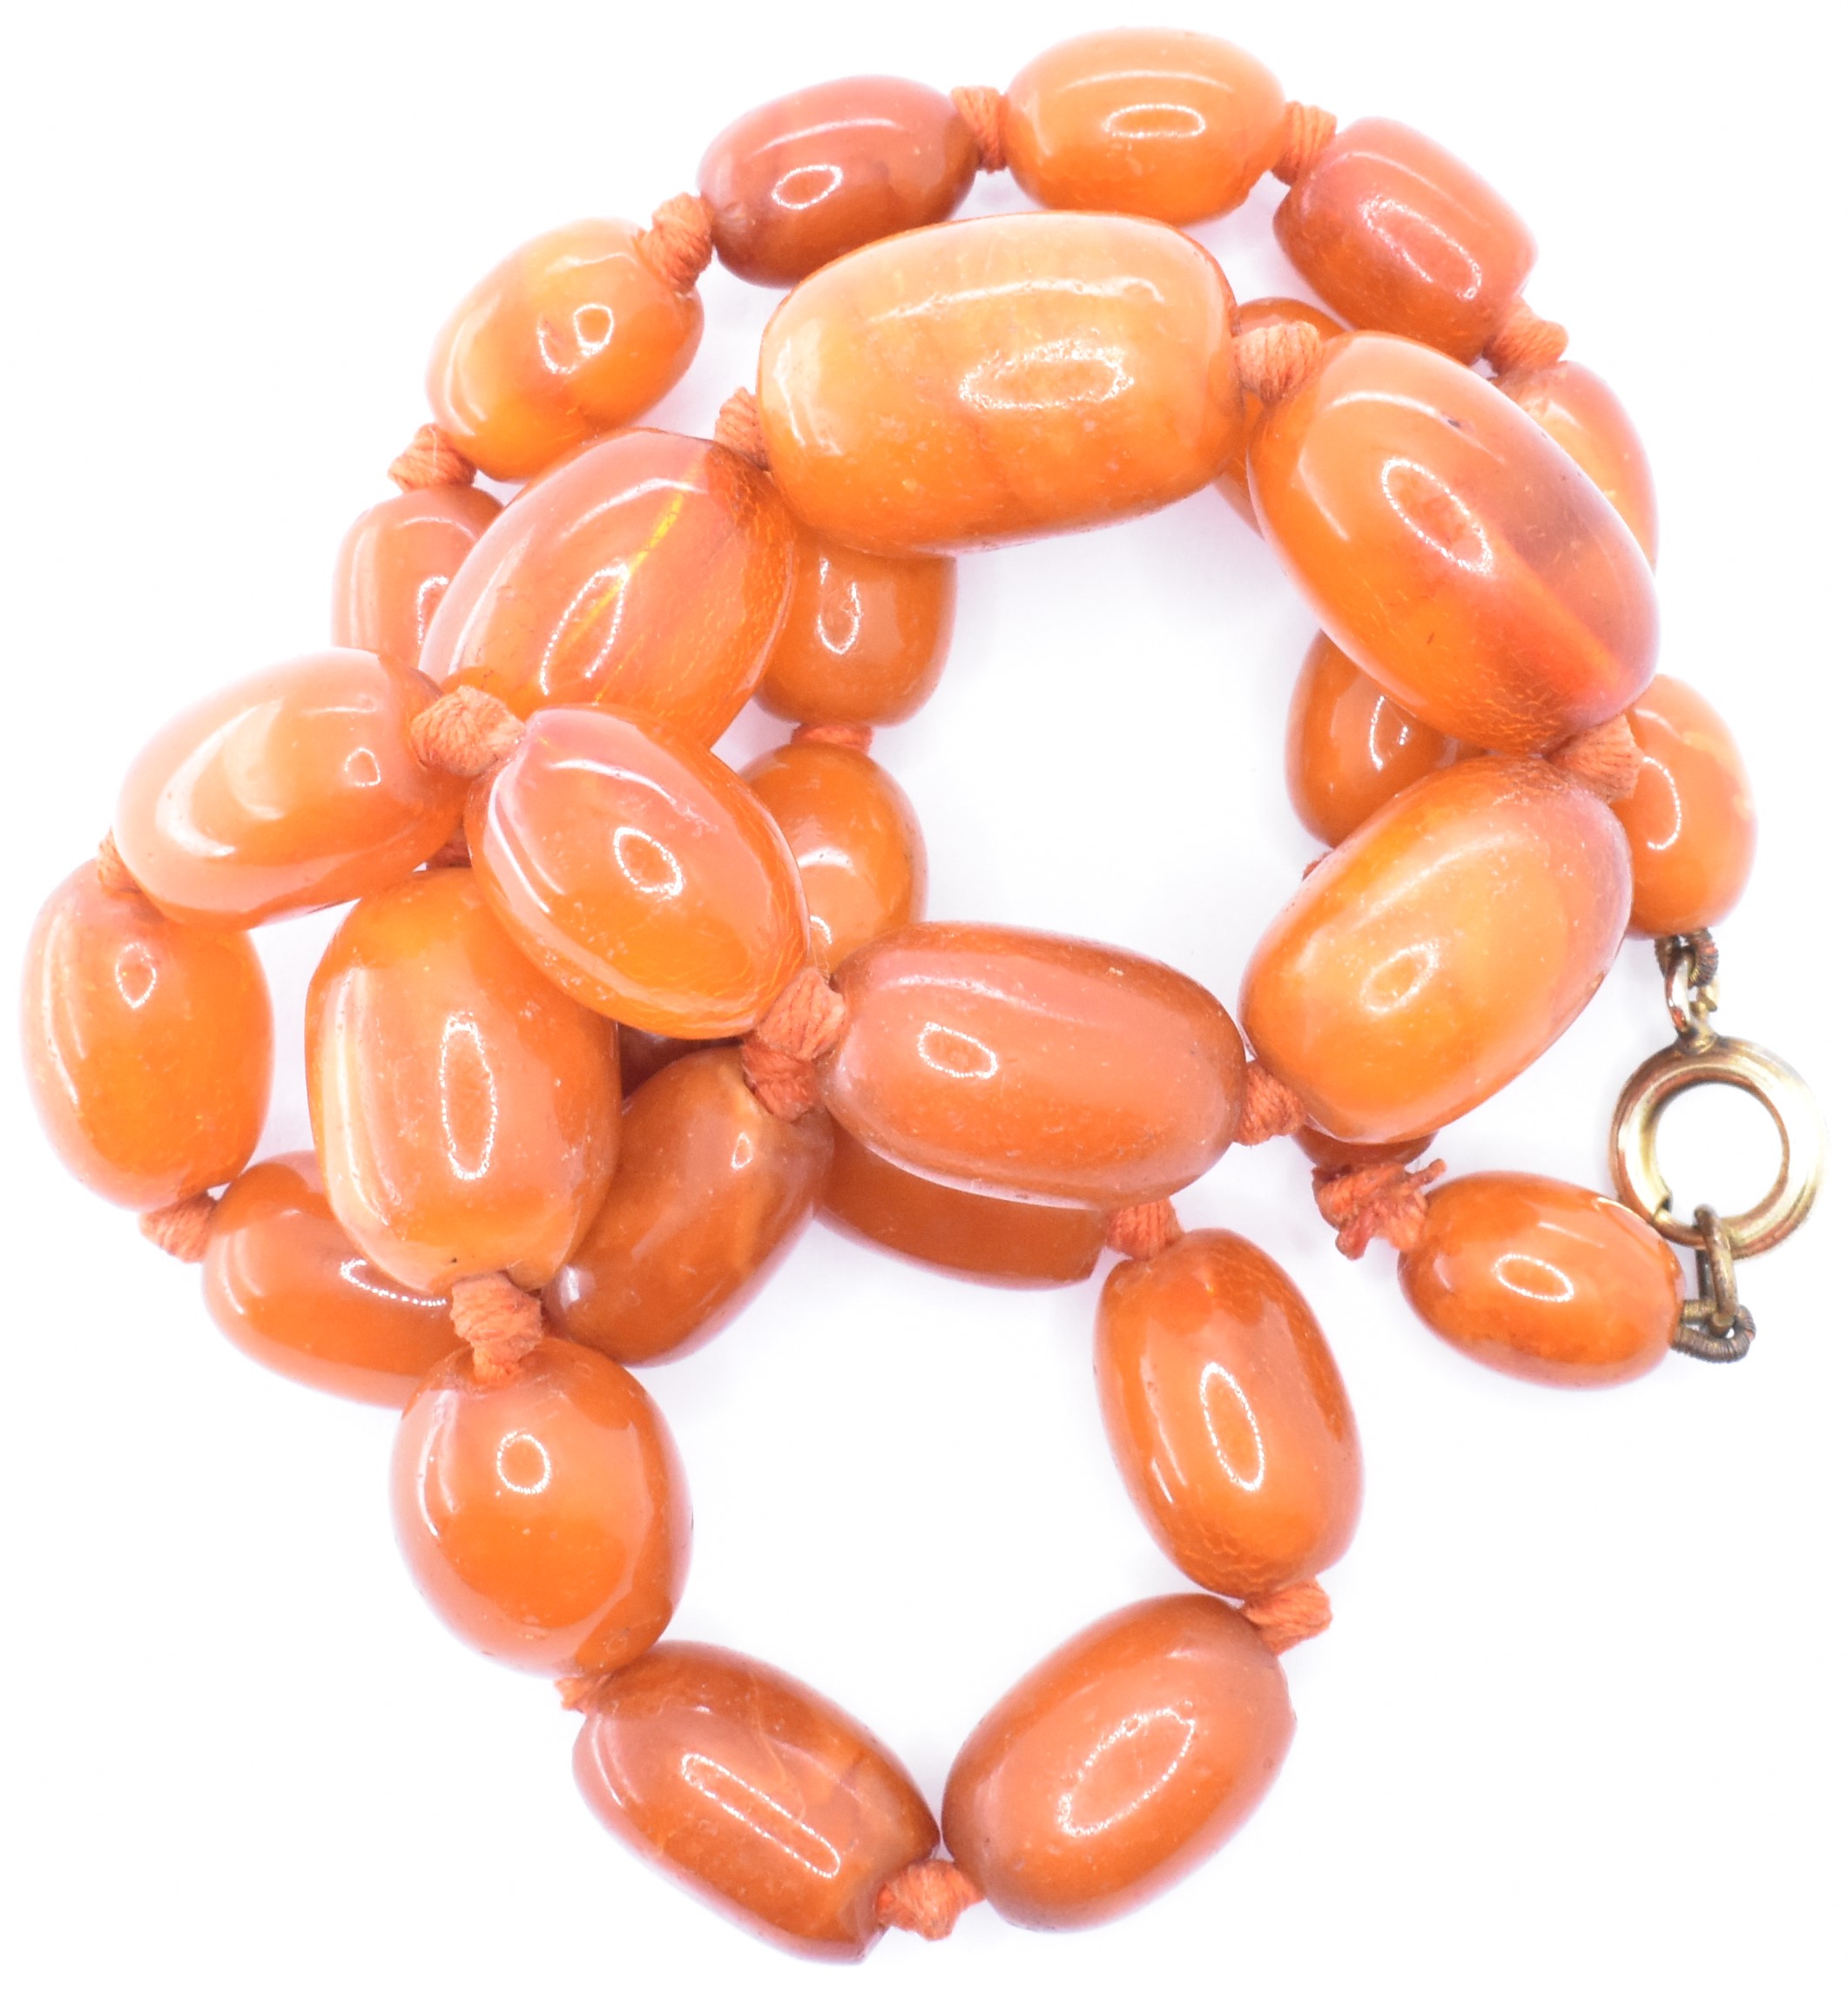 AMBER BEAD NECKLACE - Image 6 of 6